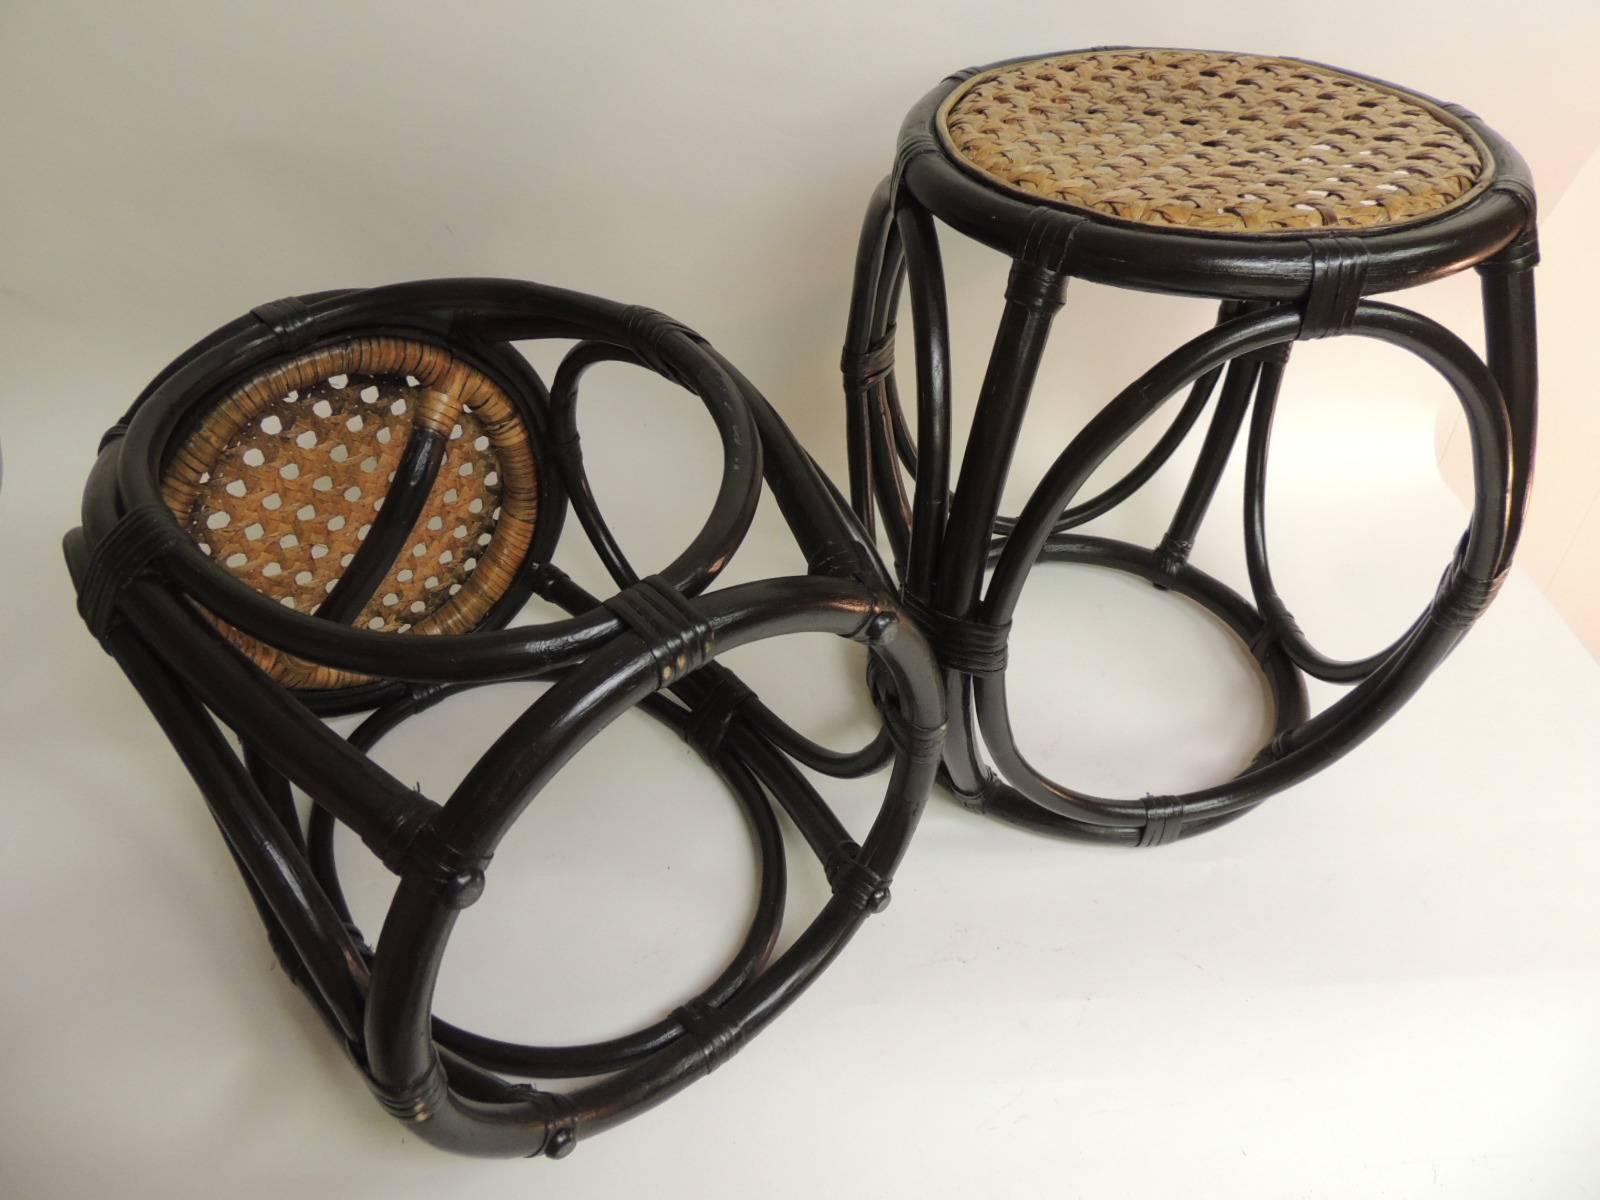 Hand-Crafted HOLIDAY SALE: Pair of Vintage Bentwood Thonet Style Stools with Wicker Seats